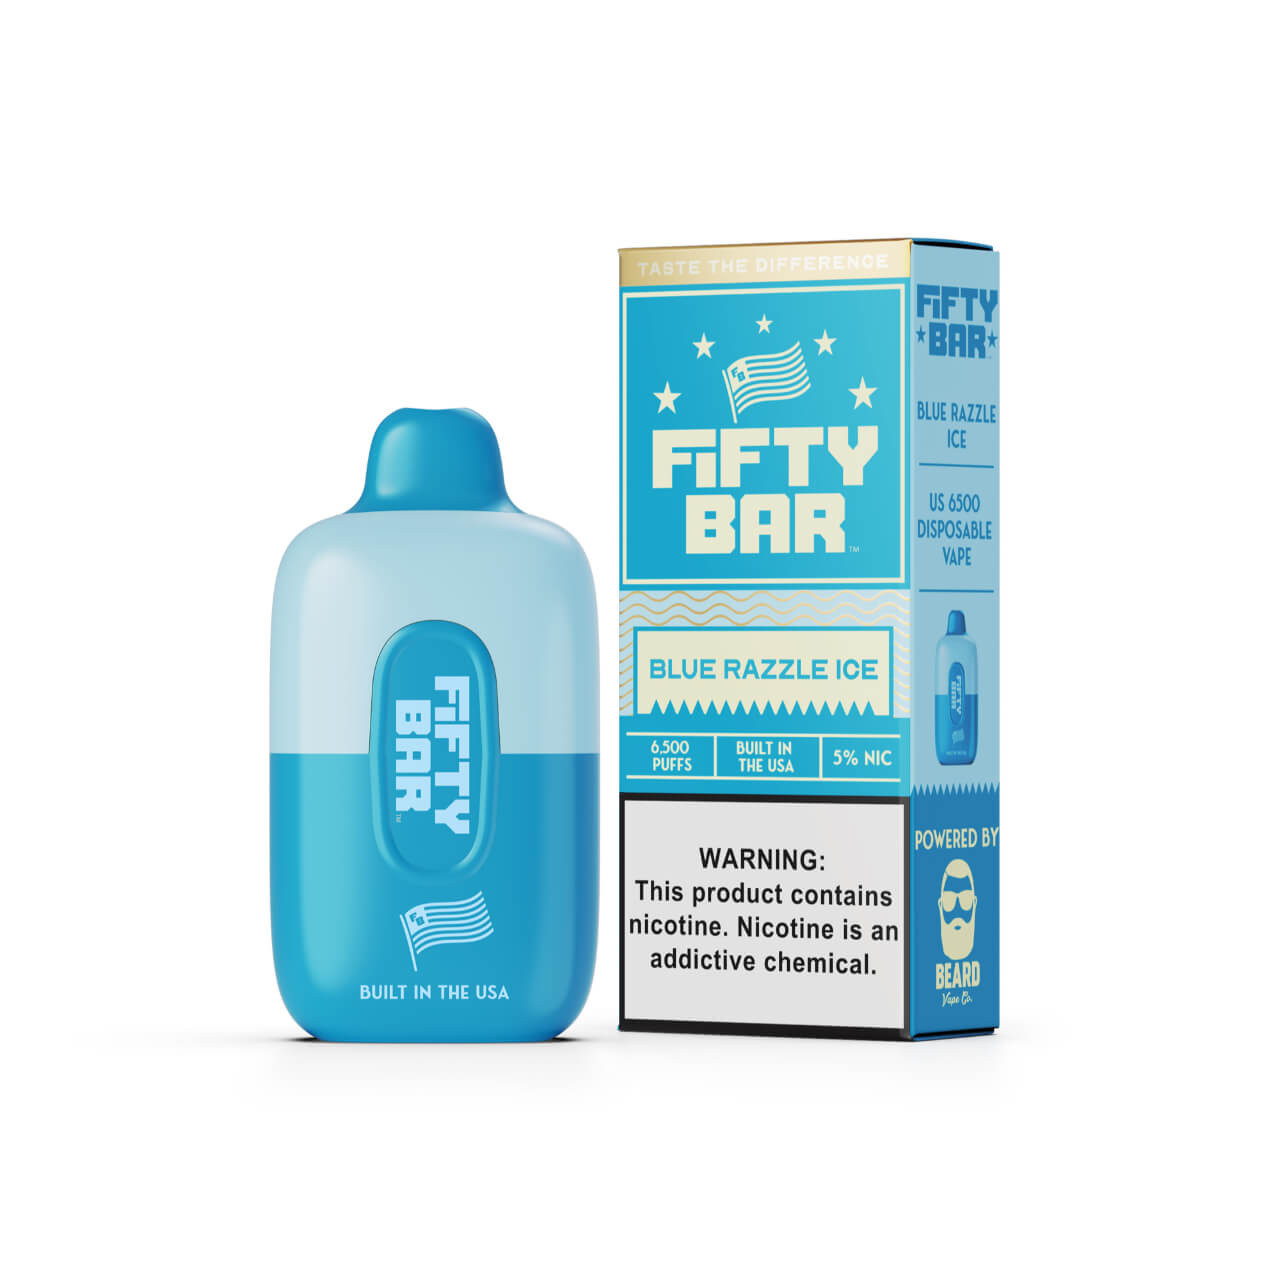 Fifty Bar Disposable (6500 Puffs) -Blue razzle ice